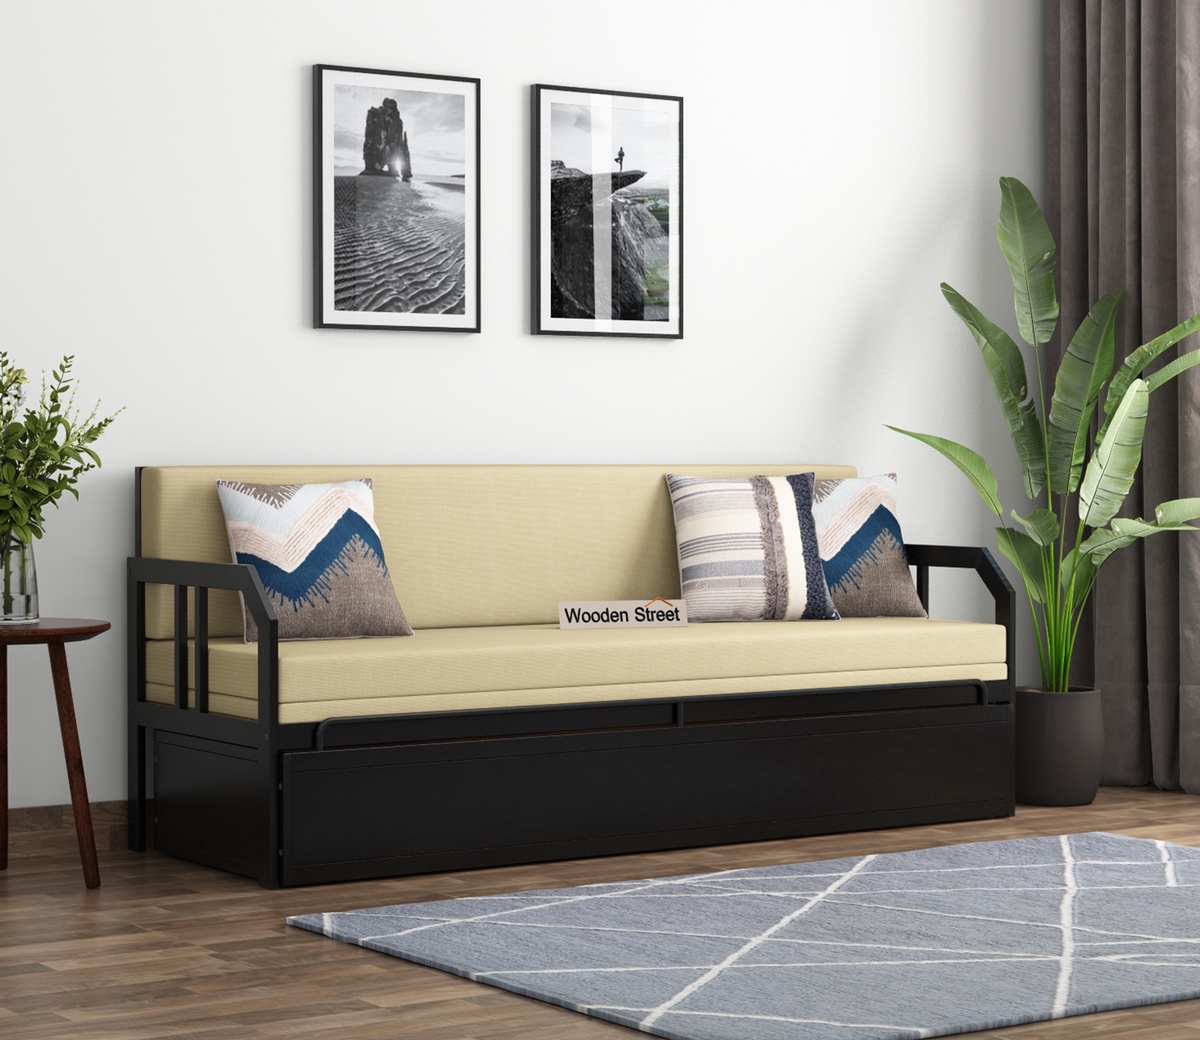 Sleep and Style Combined: Discover the Versatility of Sofa Cum Beds